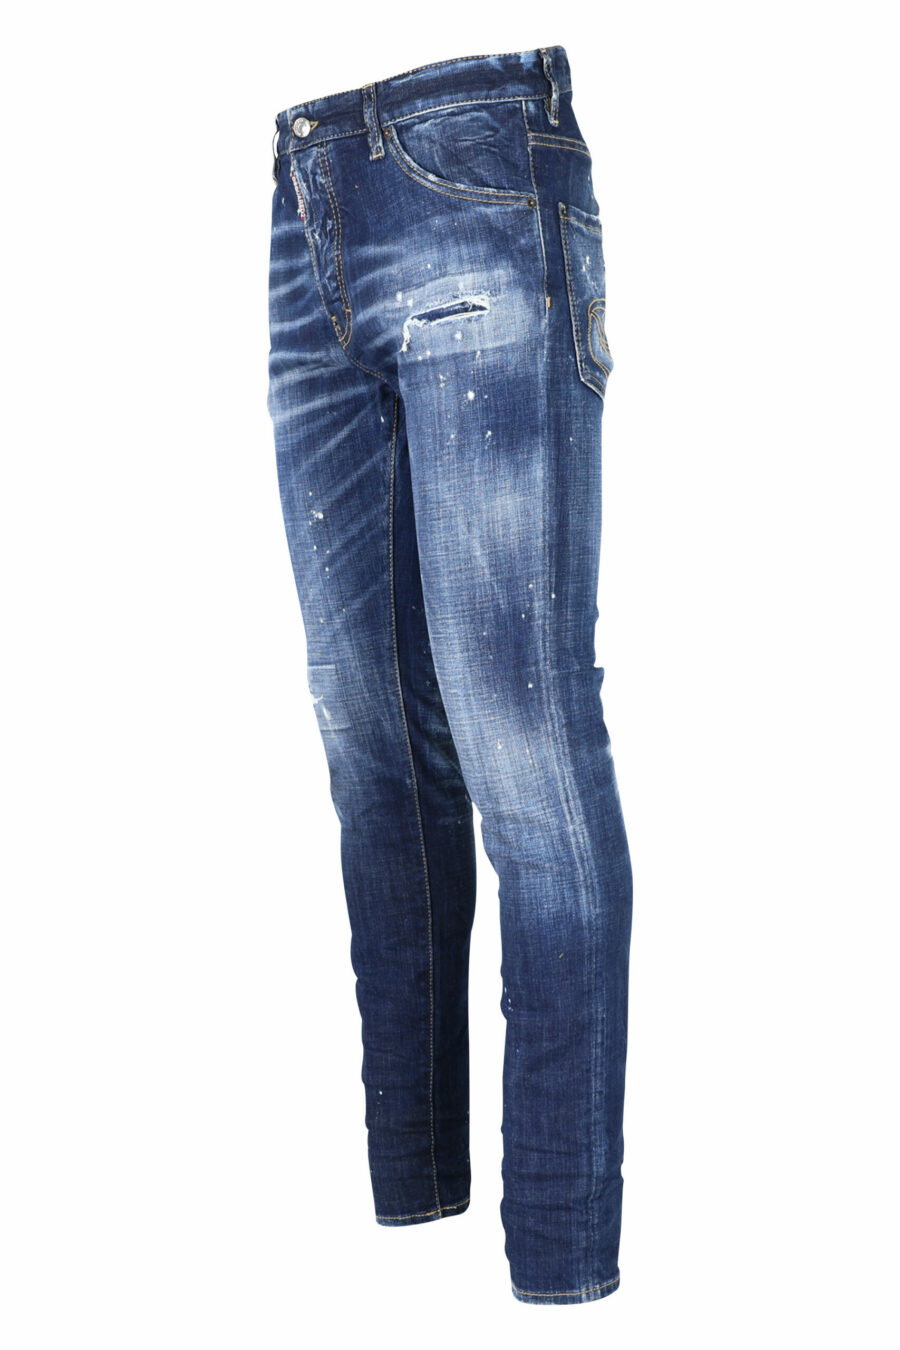 Blue "cool guy jean" jeans with paint and frayed - 8054148101688 1 scaled